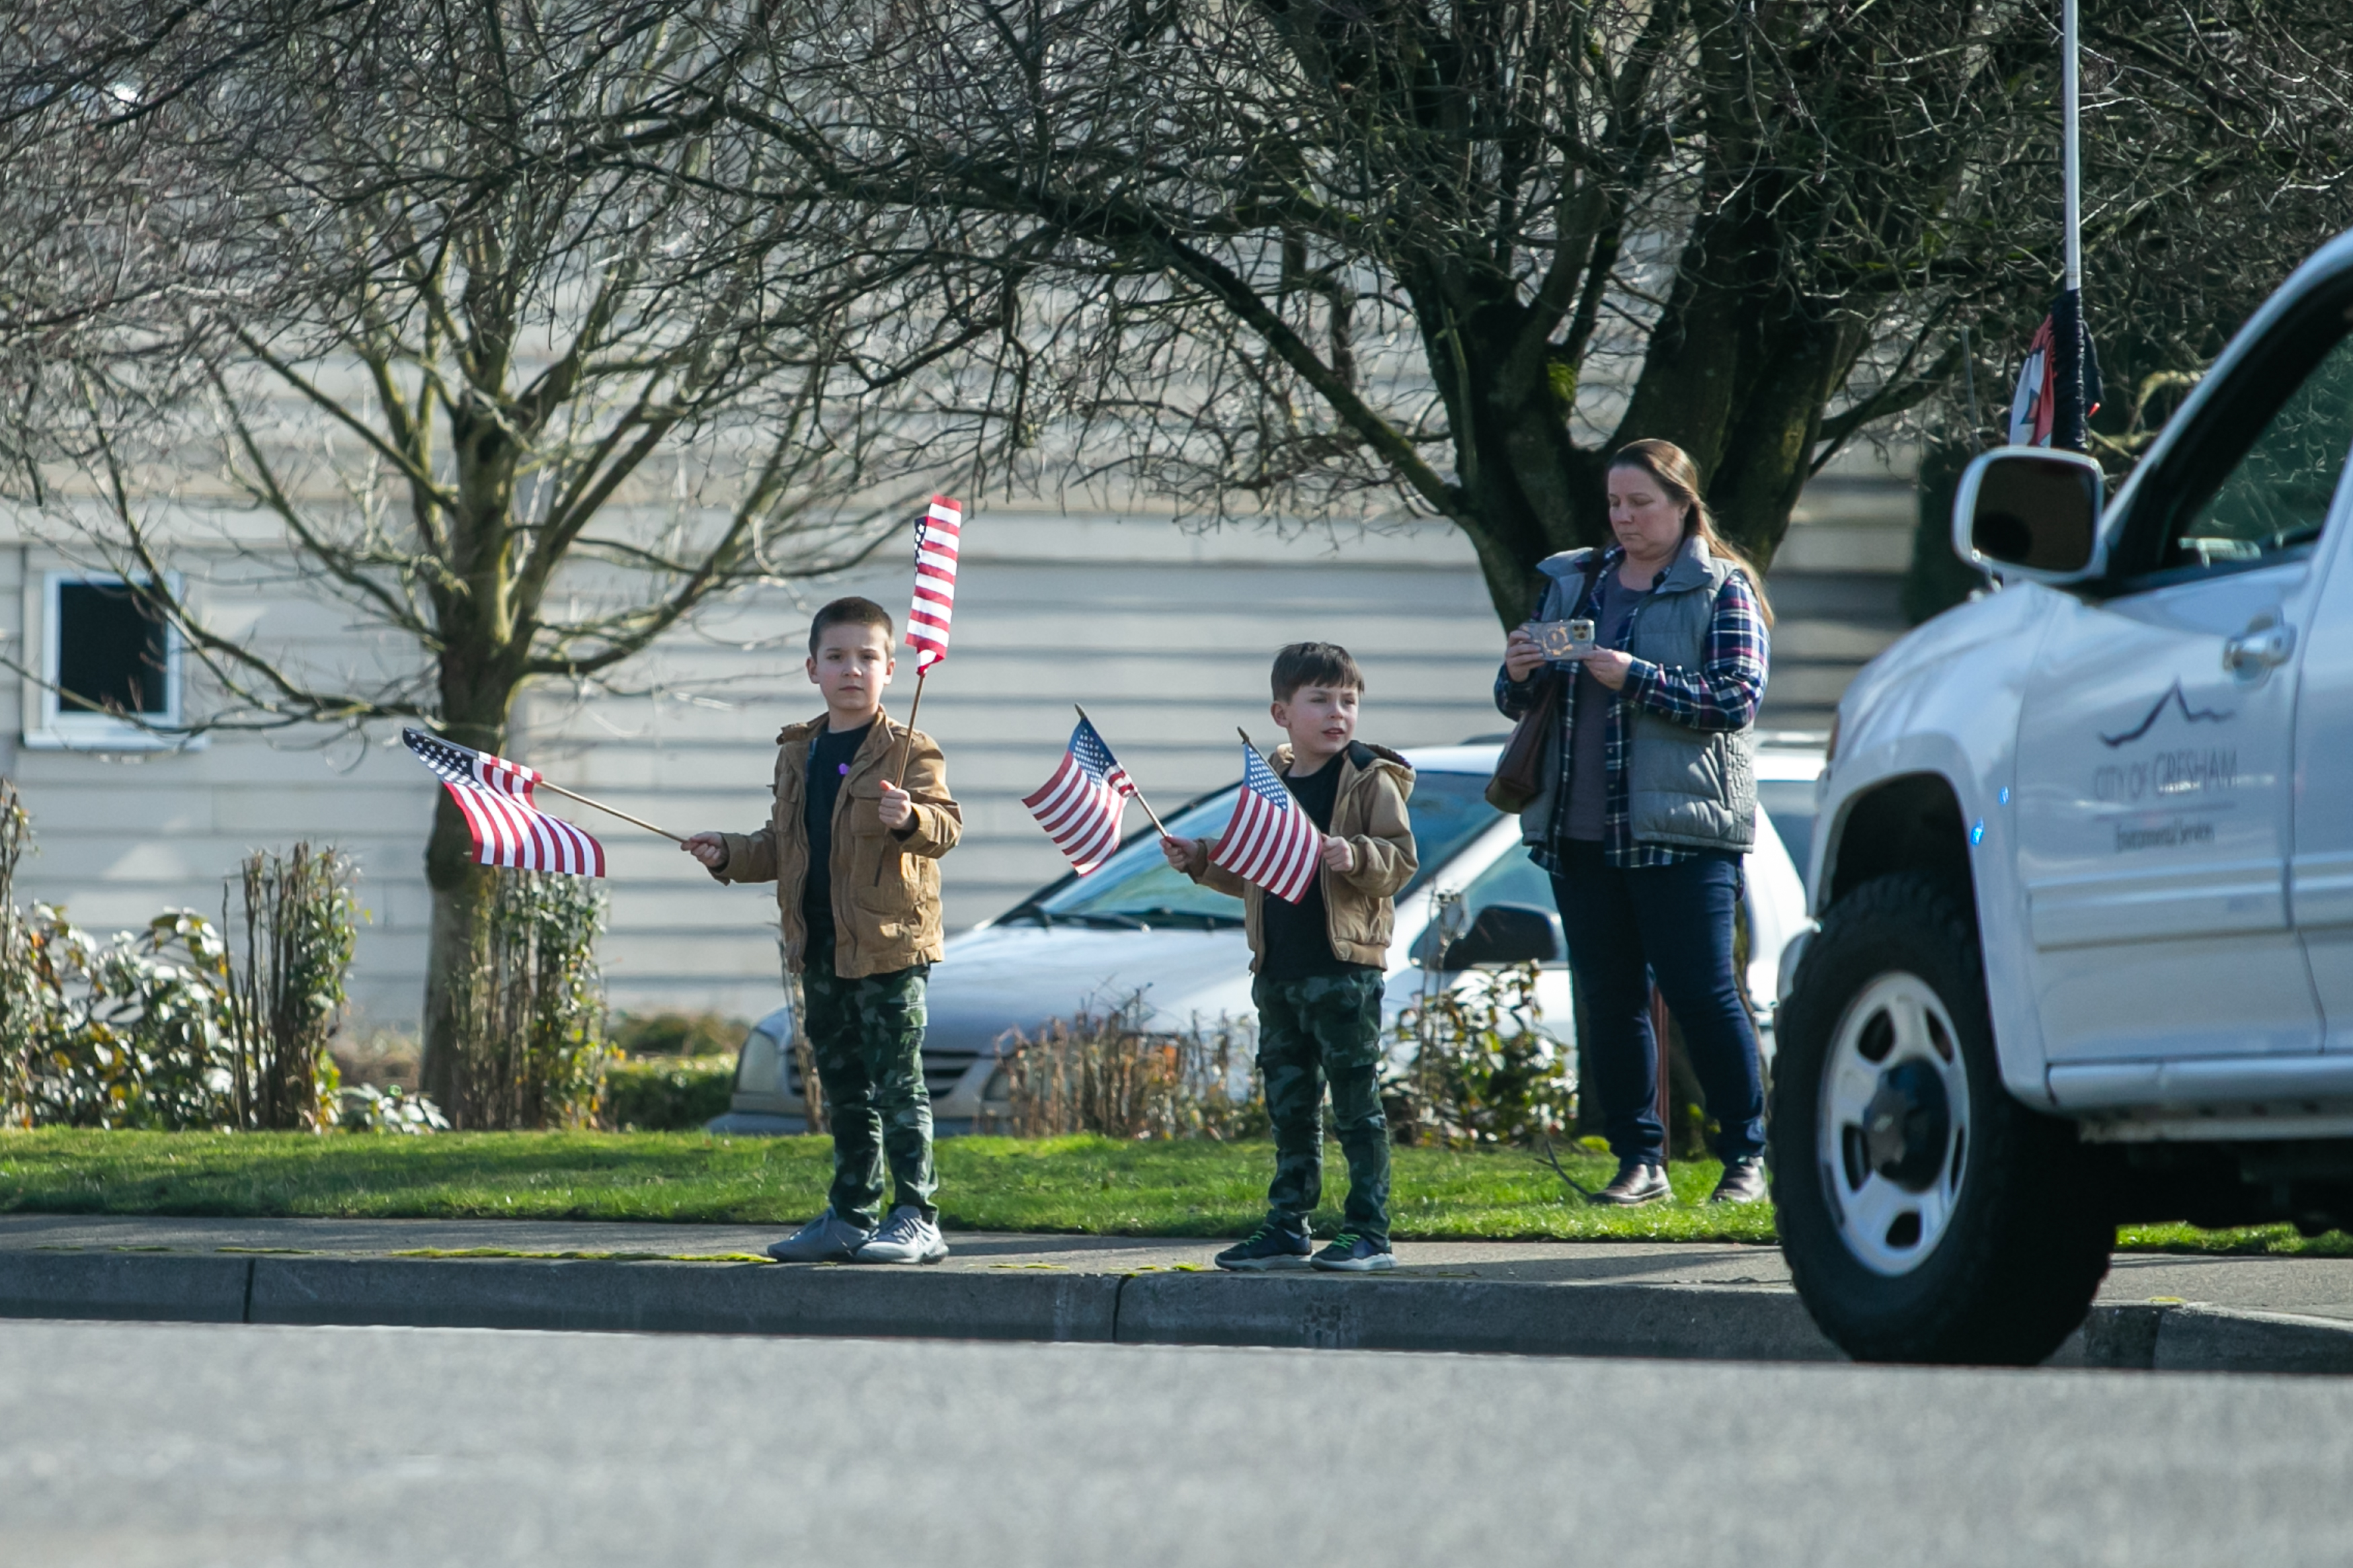 Two young boys wave American flags as a procession of first responders drives through downtown Gresham, Oregon honoring Gresham Firefighter Brandon Norbury on Wednesday, Feb. 15 2023.